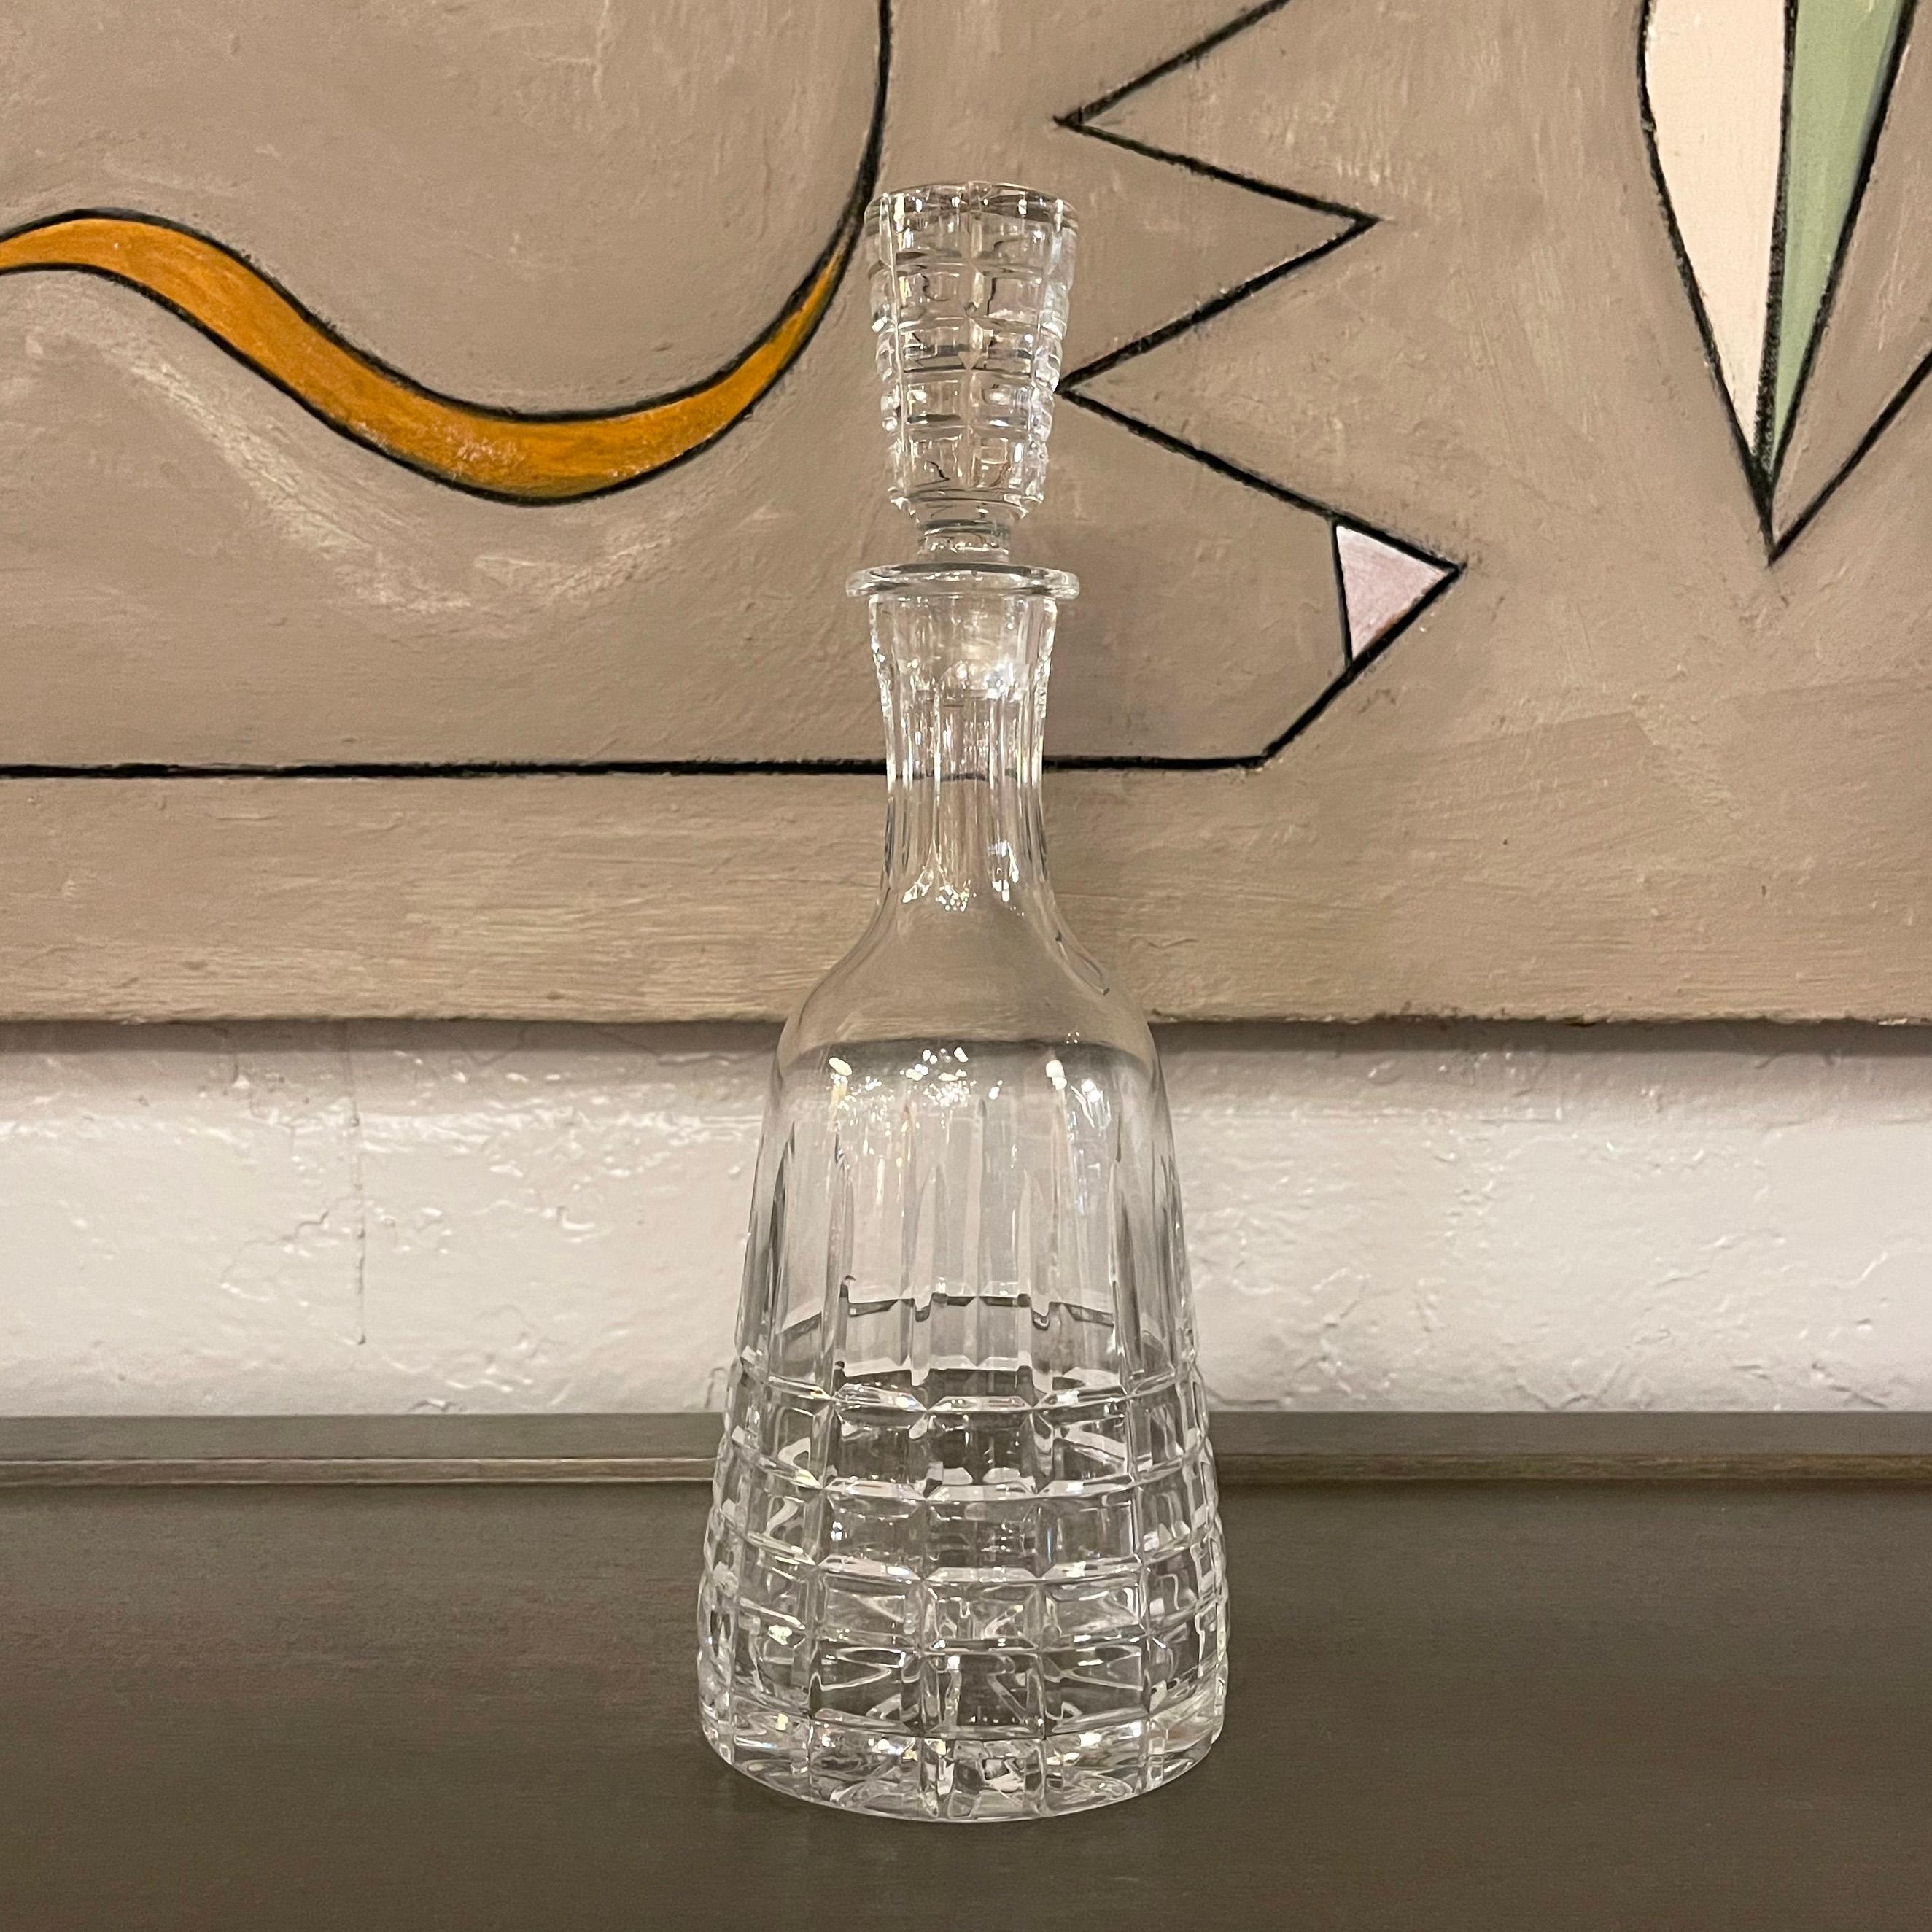 Midcentury, Edwardian style, clear cut crystal decanter with stopper.